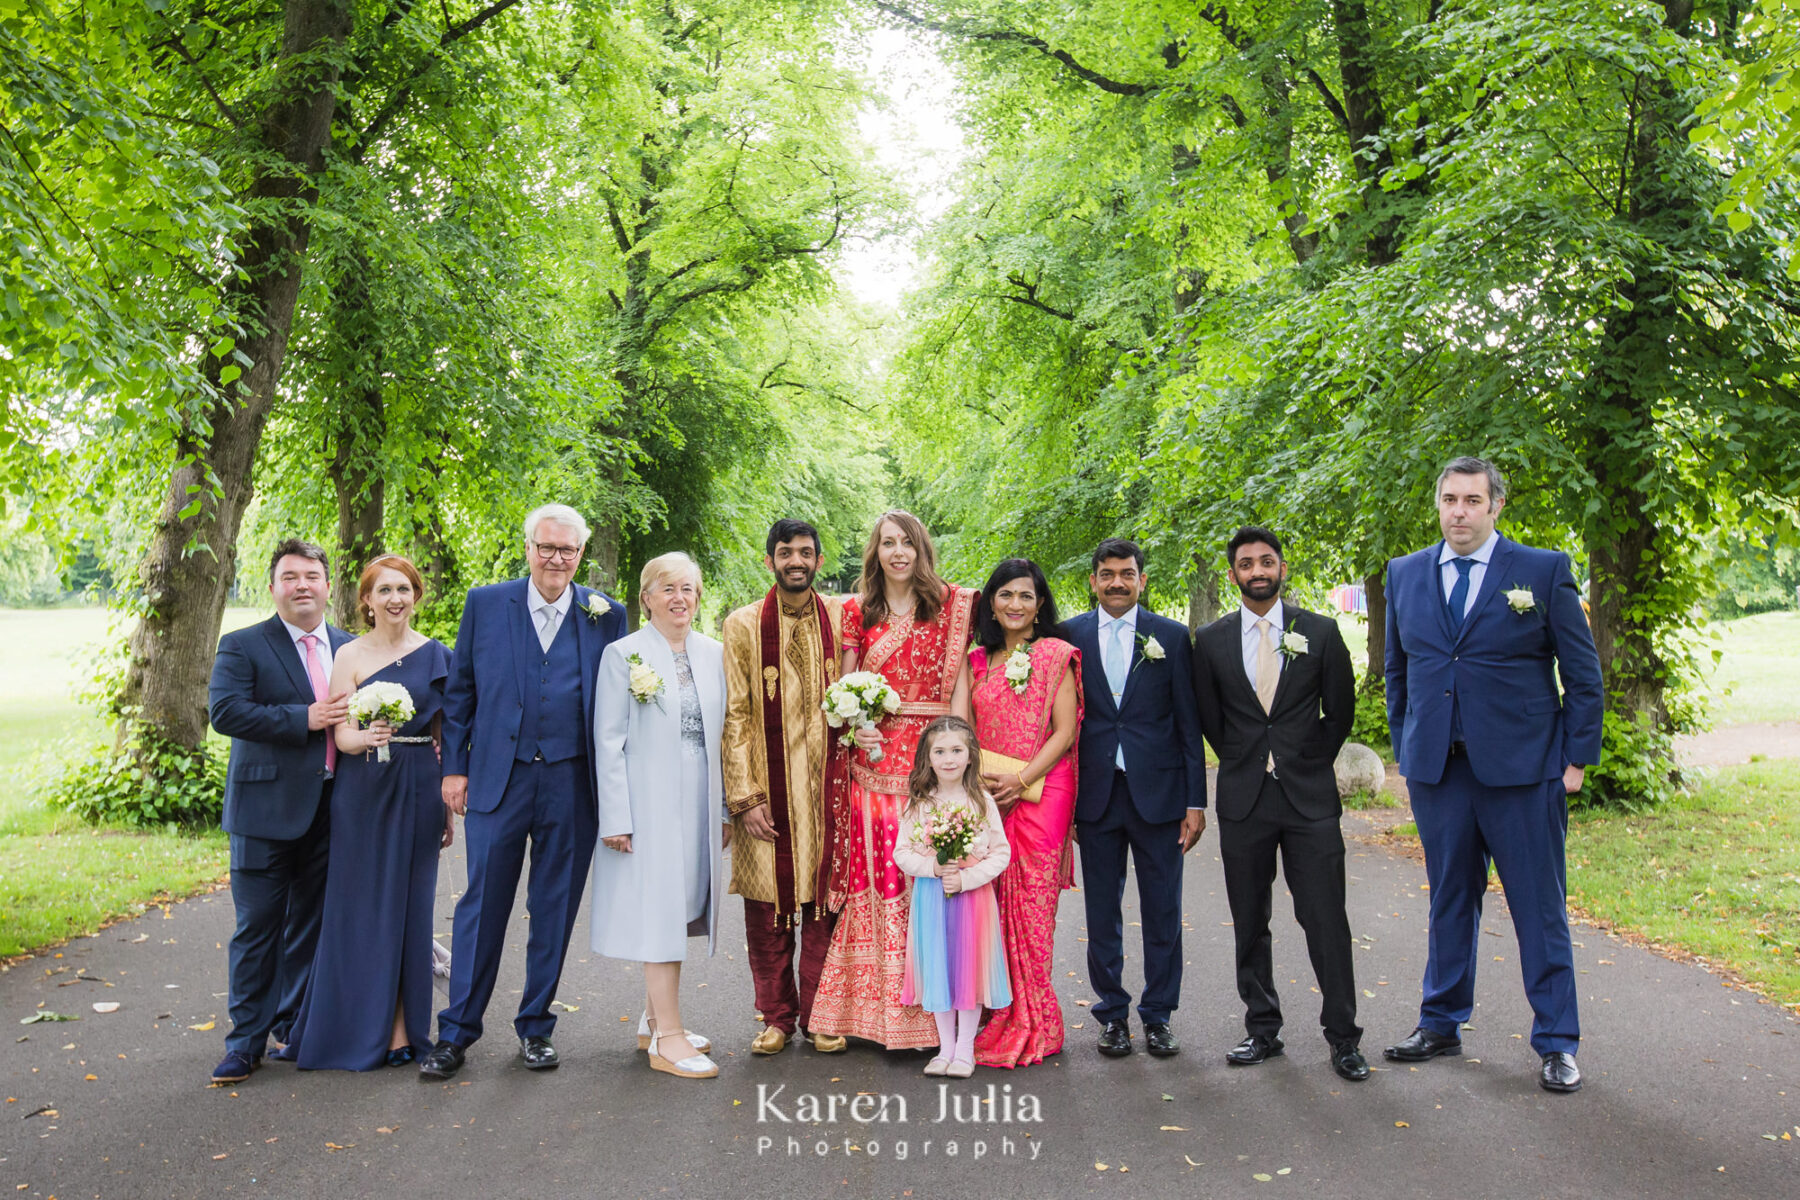 a group photo of the wedding party in traditional Indian dress in Bellahouston Park